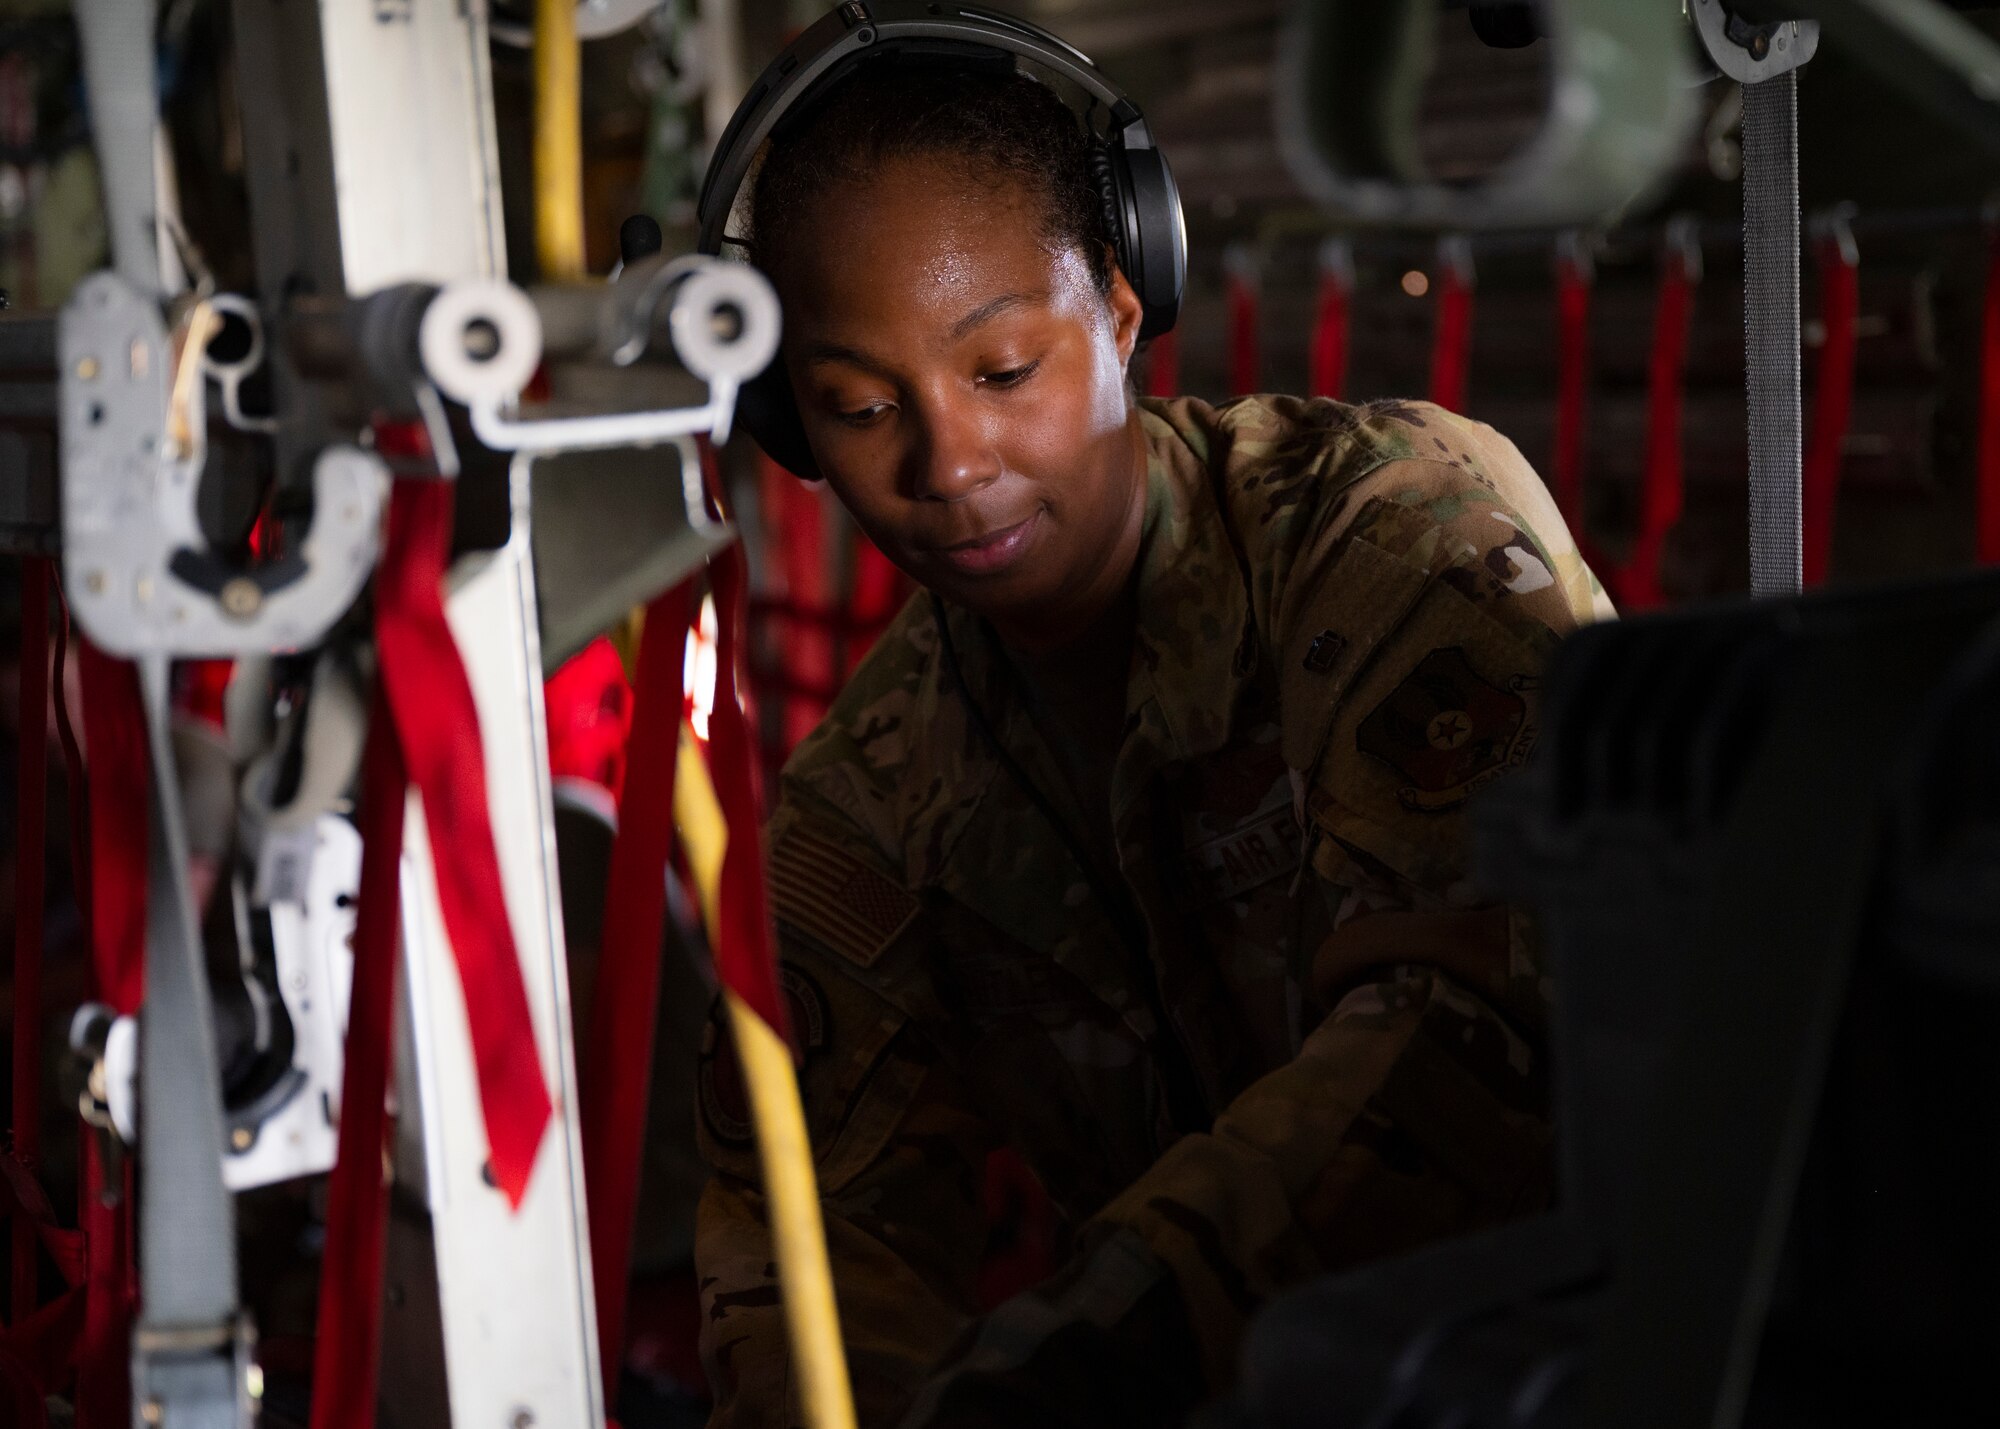 Senior Master Sgt. Maila Butler, an Aeromedical Evacuation Technician assigned to the 405th Expeditionary Aeromedical Evacuation Squadron, secures medical equipment on a C-130H Hercules at Ali Al Salem Air Base, Kuwait, Oct. 1, 2021.